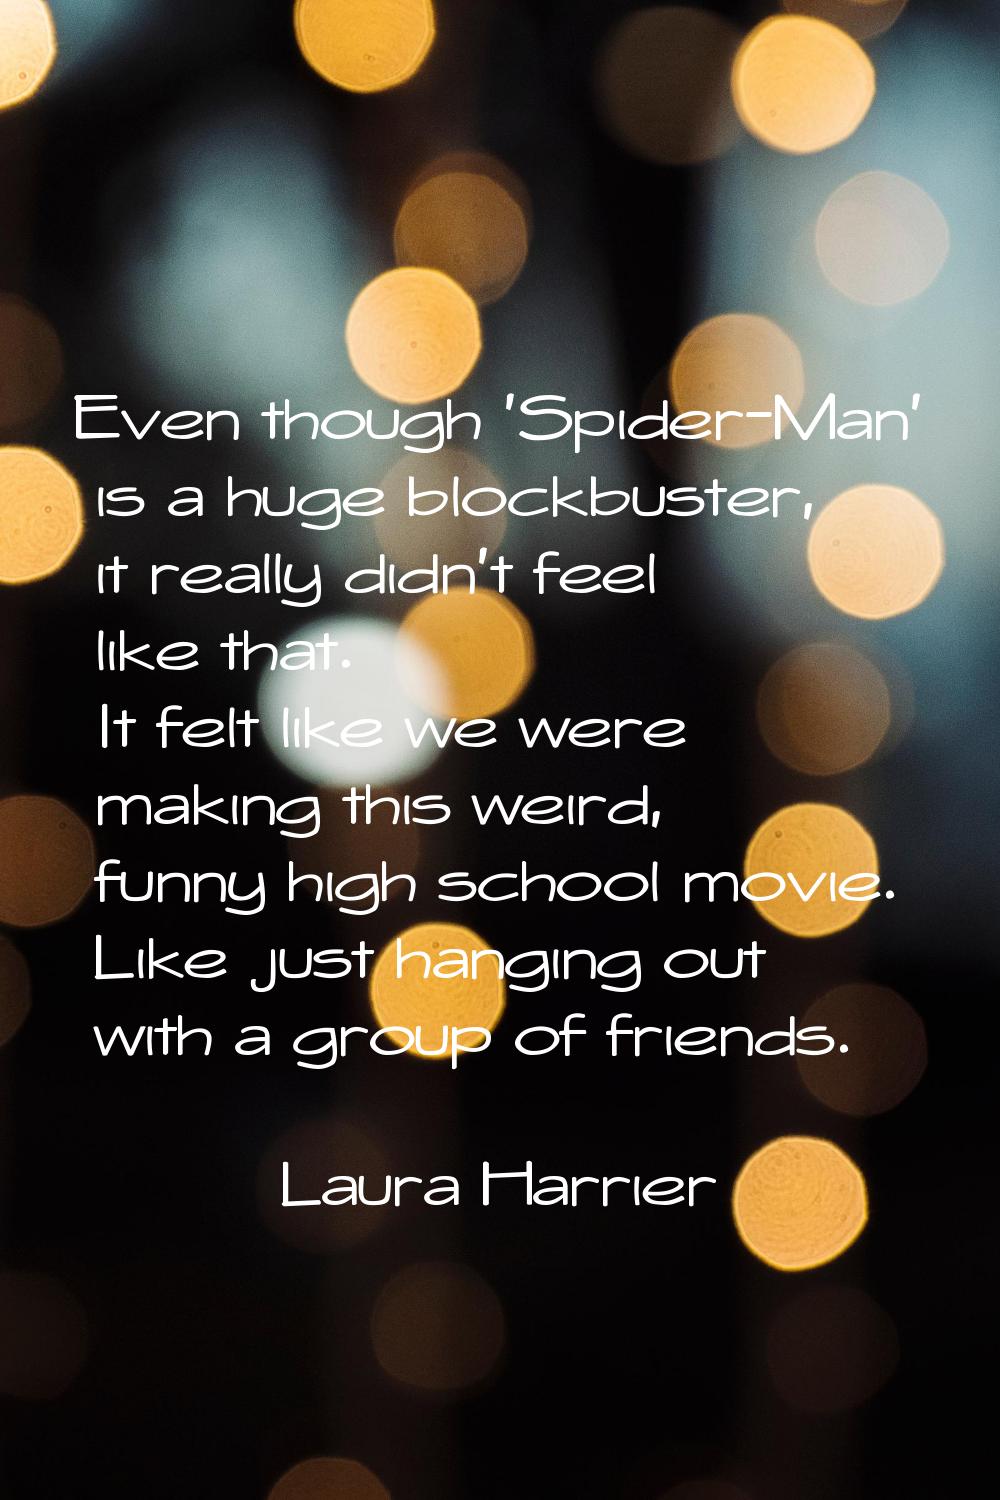 Even though 'Spider-Man' is a huge blockbuster, it really didn't feel like that. It felt like we we